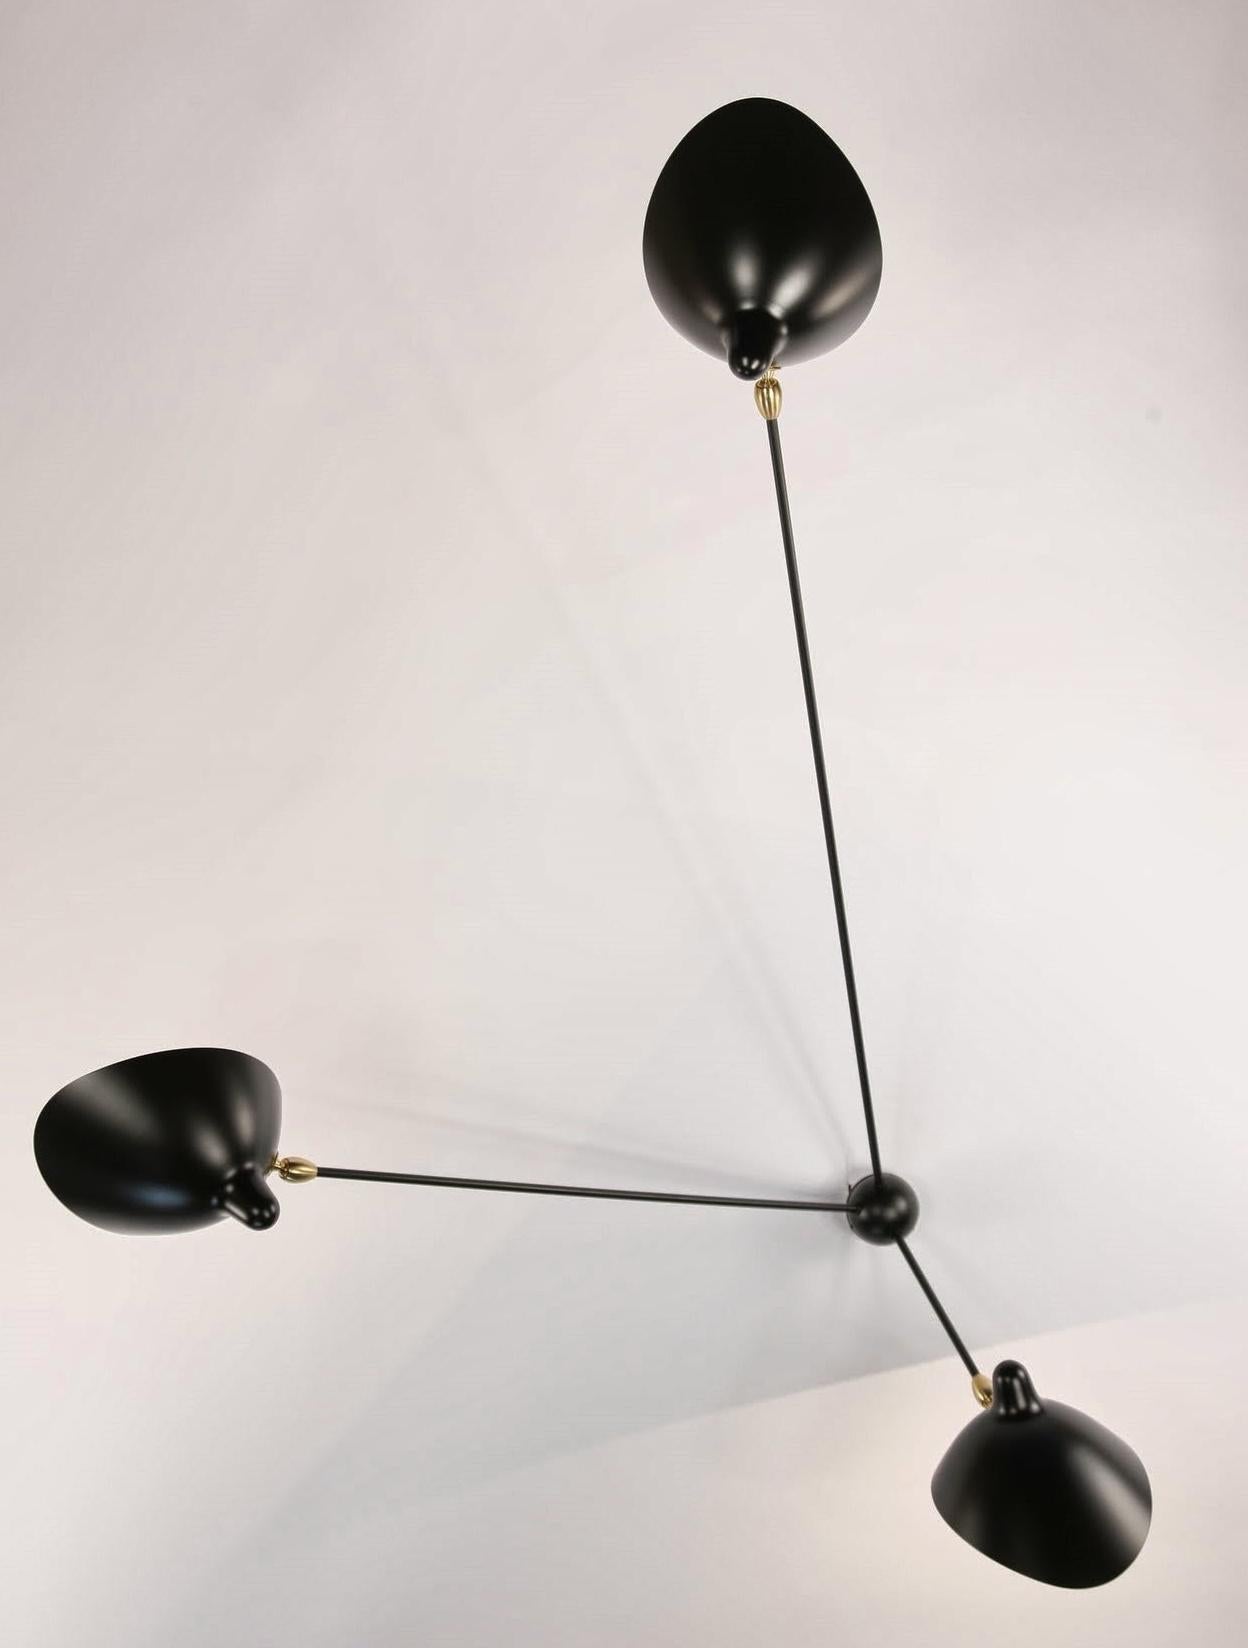 With three stationary arms projecting from the central mount into the room, this lamp becomes a reference point while illuminating the surroundings. Each lamp head tilts and revolves.   Brass fittings.
Available in white or black.

DIMENSIONS SPIDER